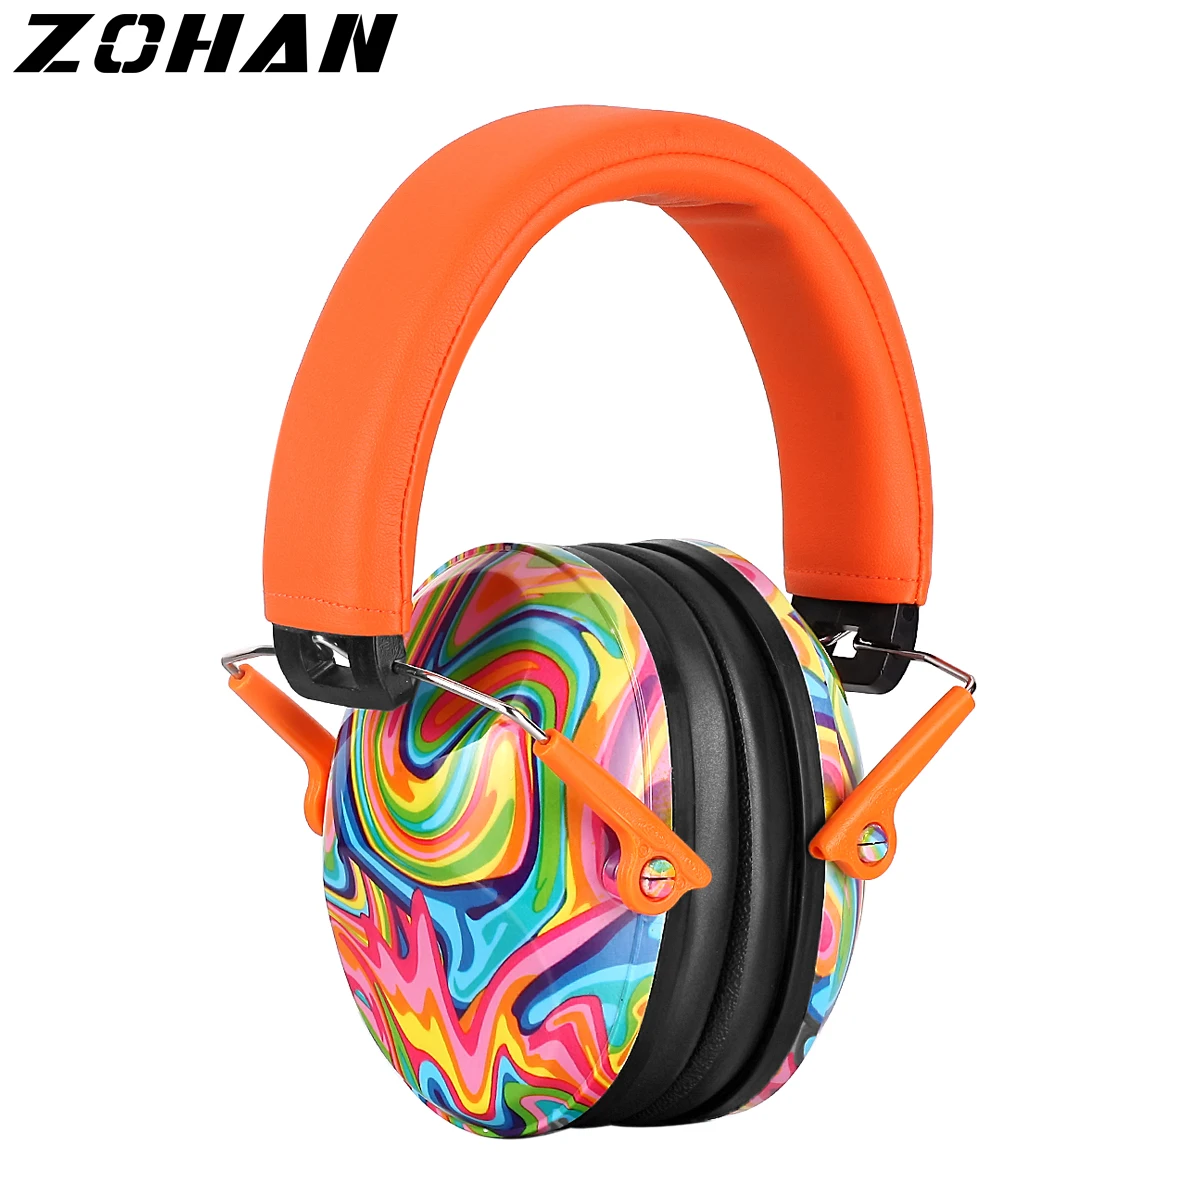 

2022 ZOHAN Kid Ear Protection Baby Noise Earmuffs Noise Reduction Ear Defenders earmuff for children Adjustable nrr 25db Safety